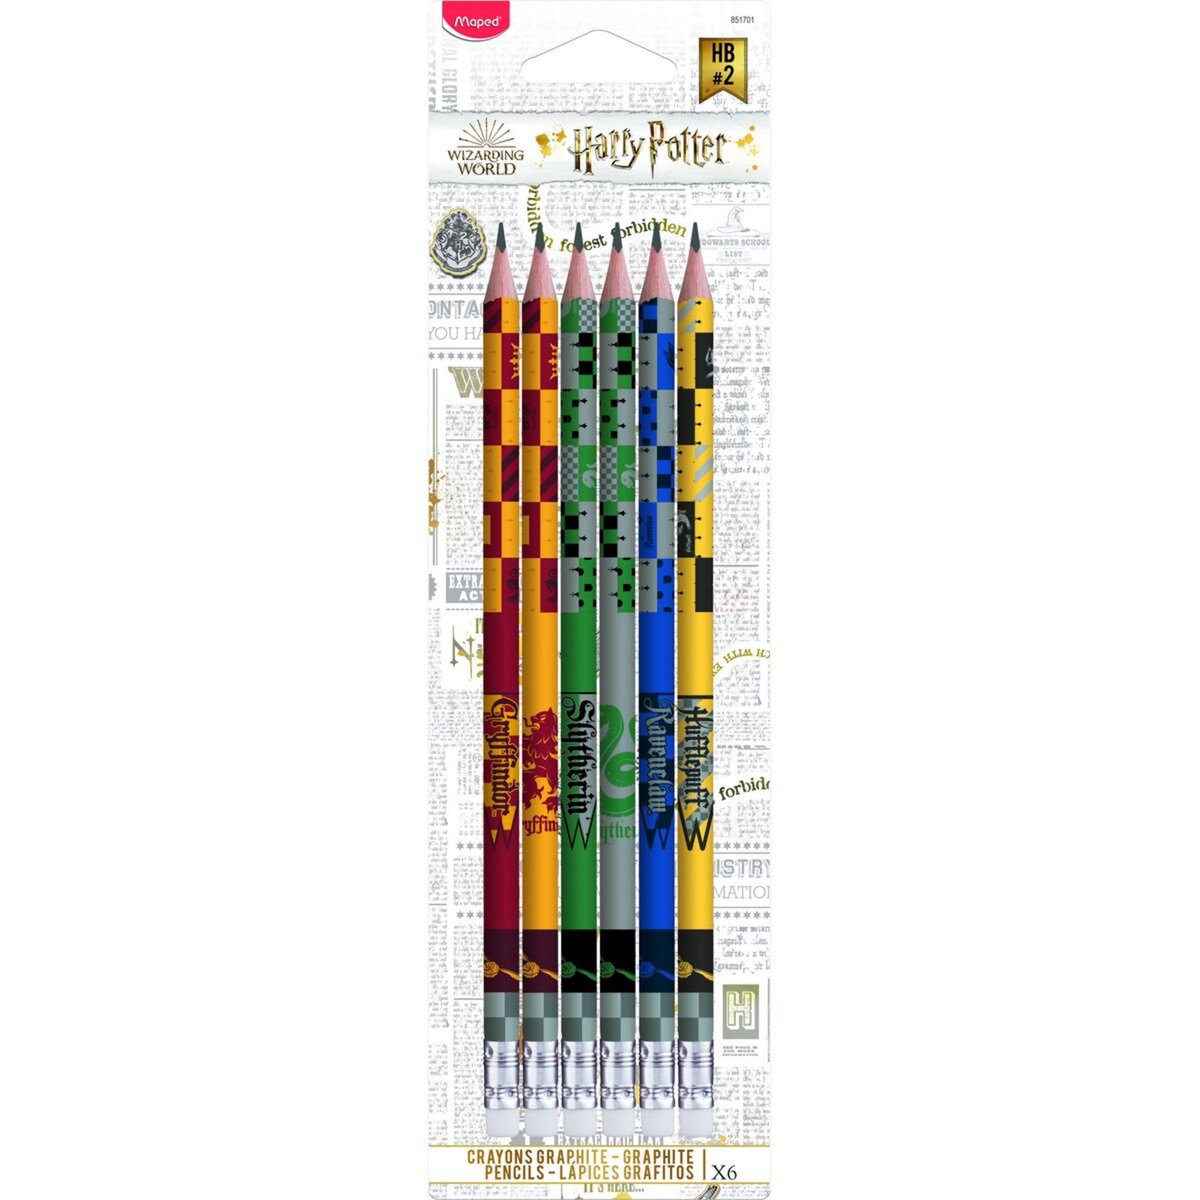 MAPED Lot de 6 crayons graphite HB HARRY POTTER embout gomme